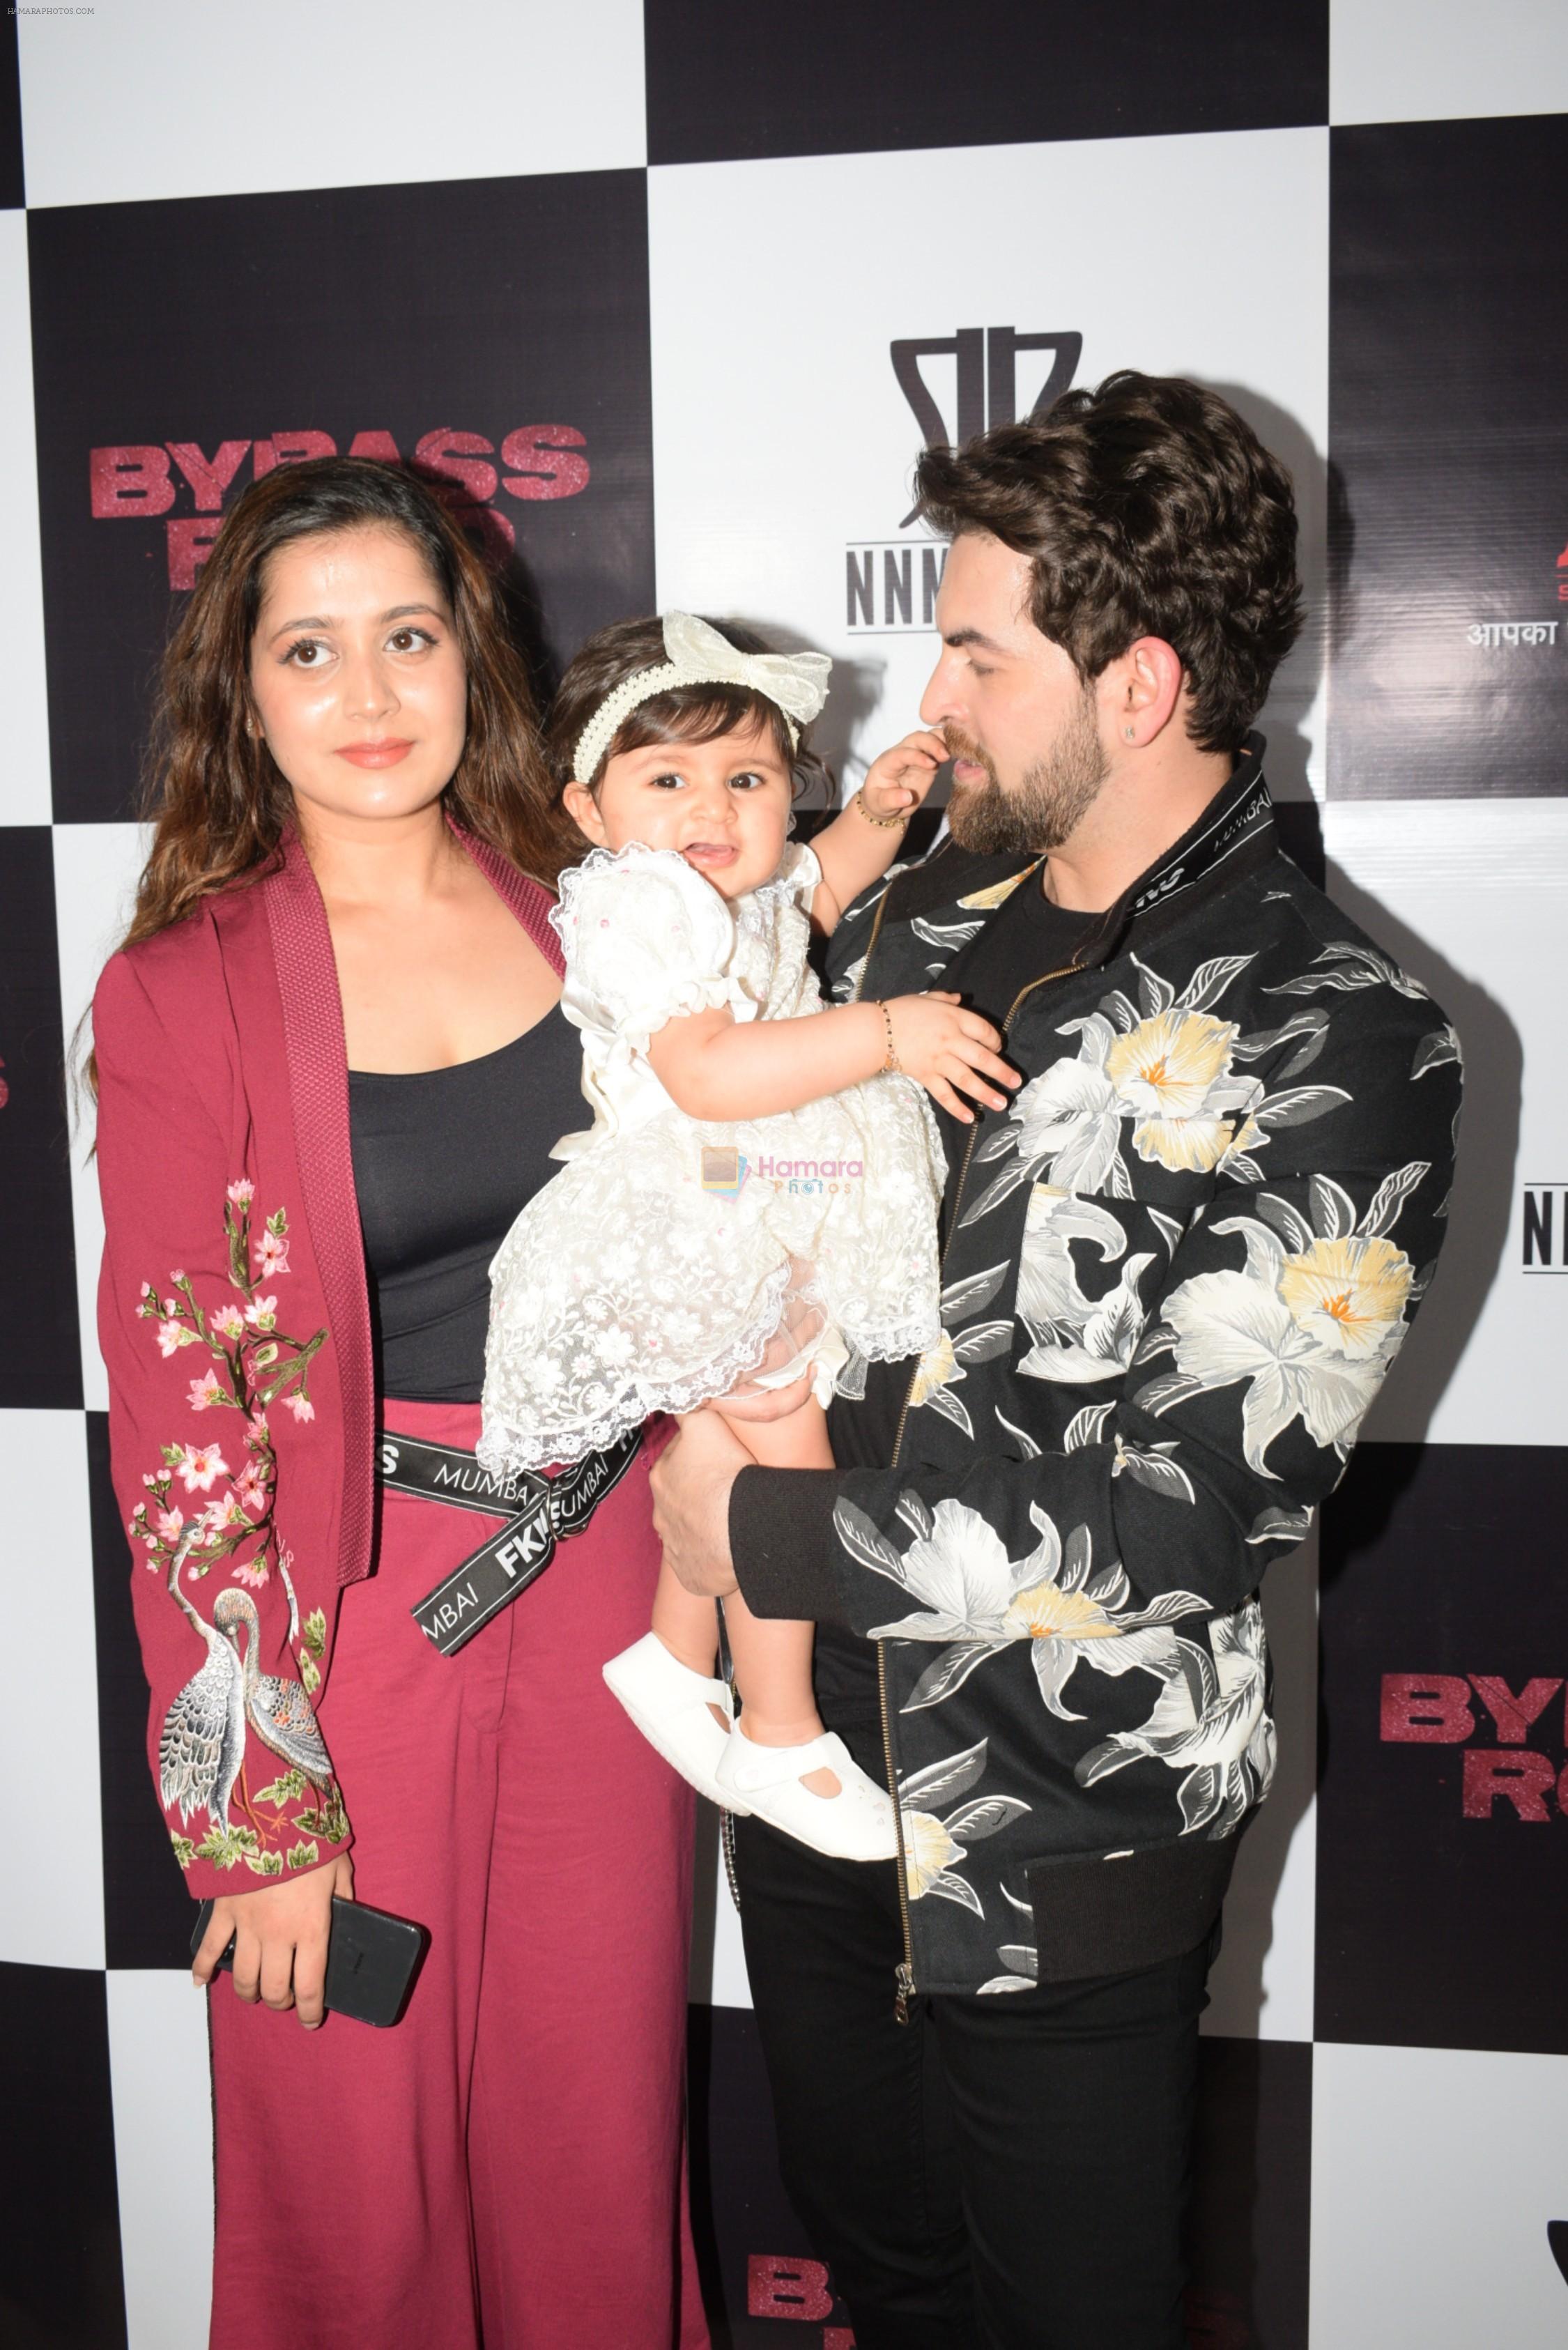 Neil Nitin Mukesh at the Wrapup party of film Bypass Road in andheri on 20th June 2019